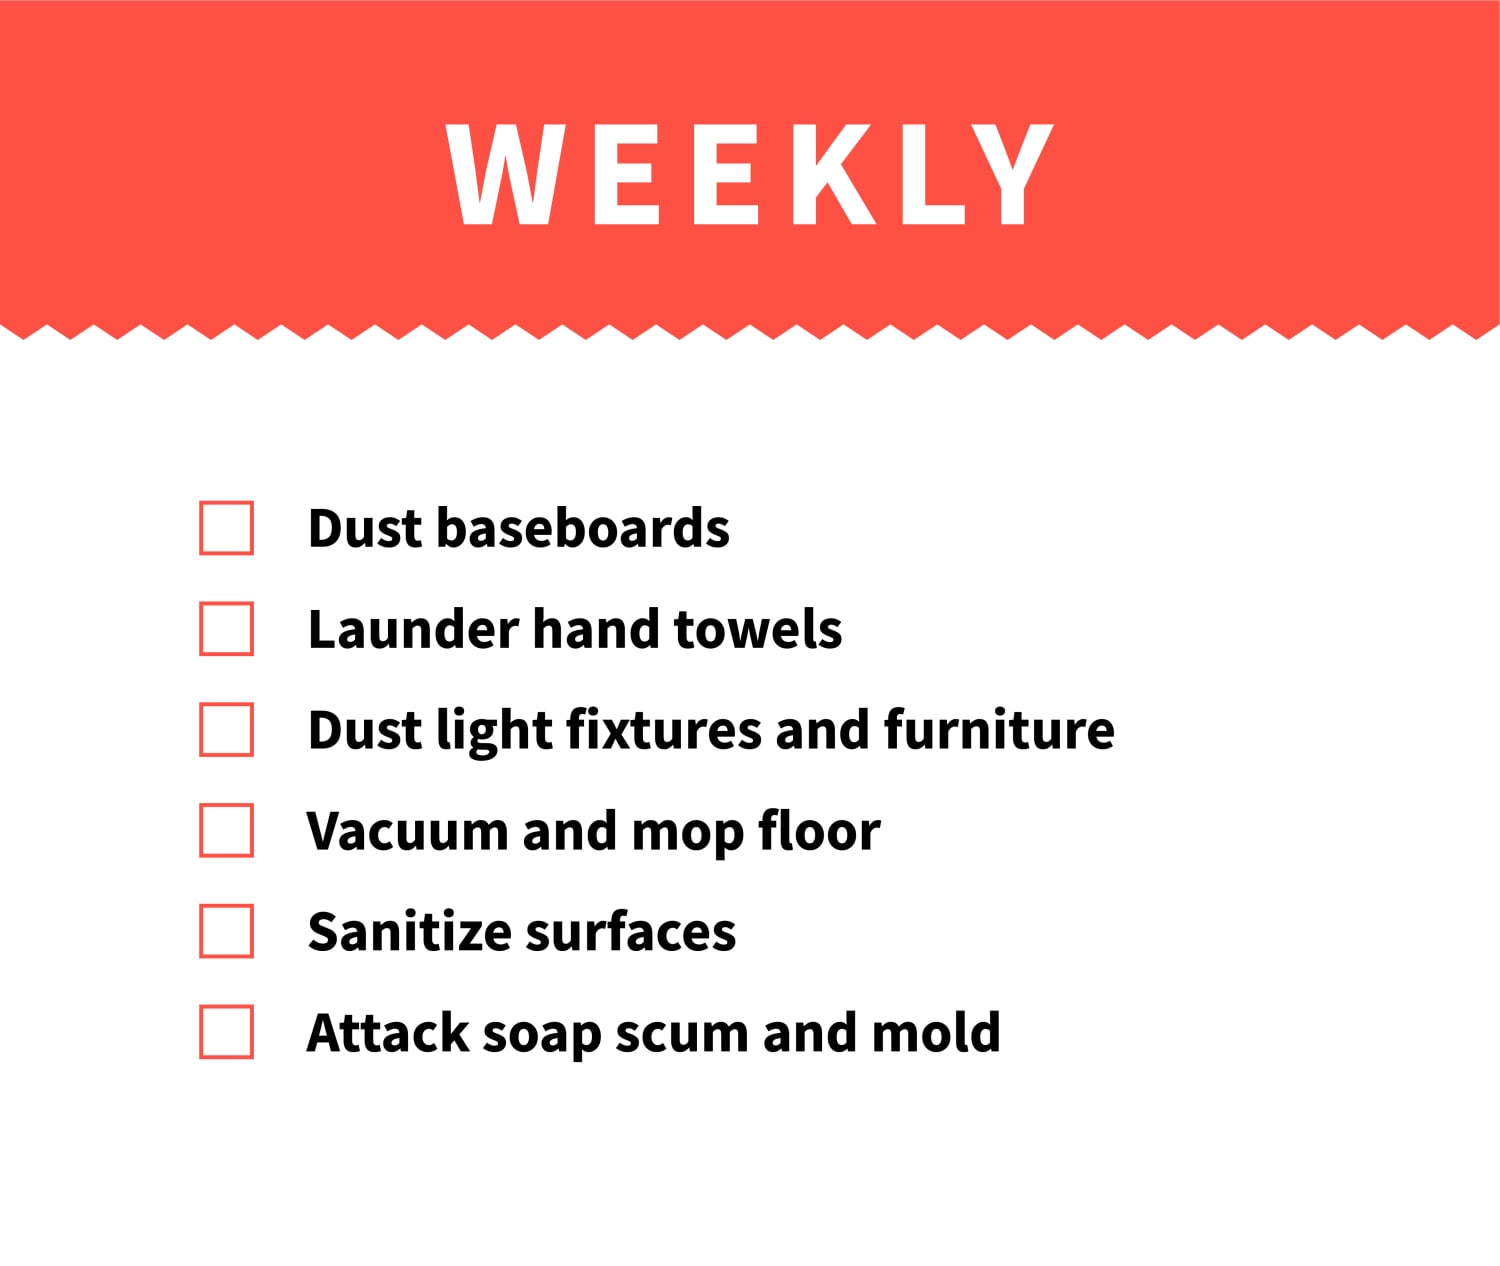 Bathroom Cleaning Checklist for Every Schedule